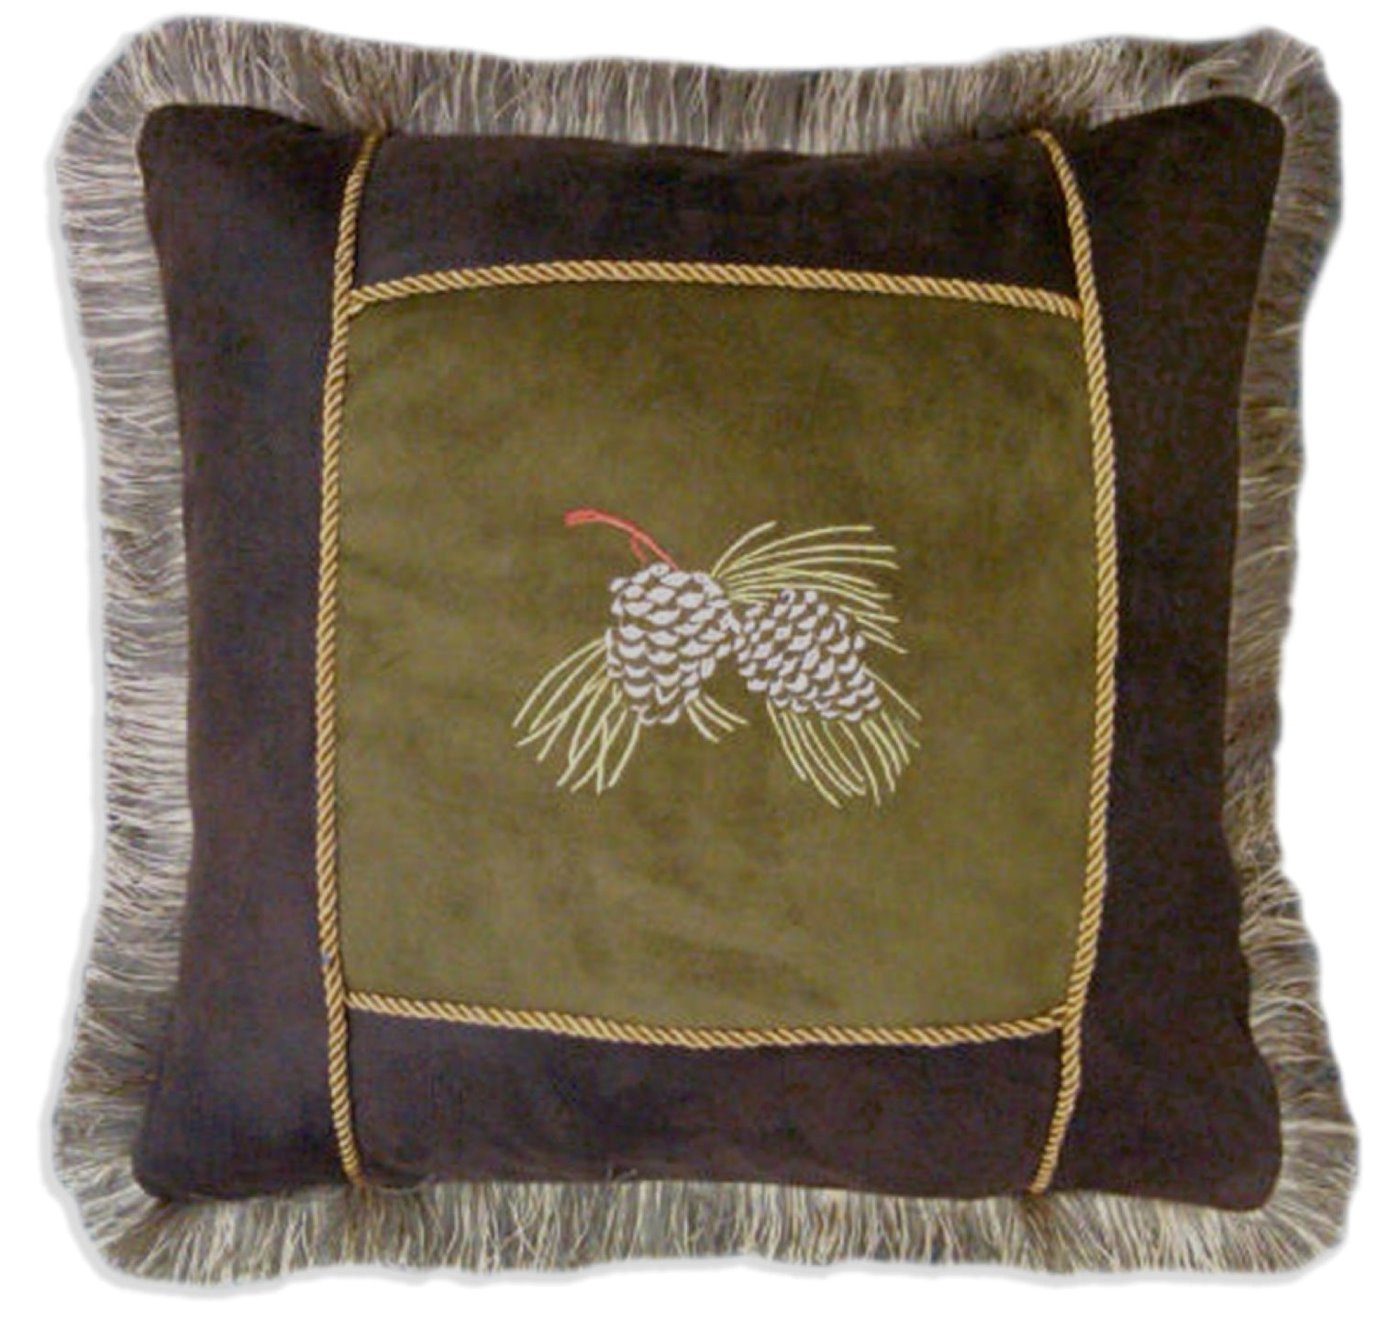 Carstens Sage Pinecone Rustic Cabin Throw Pillow 18" x 18"